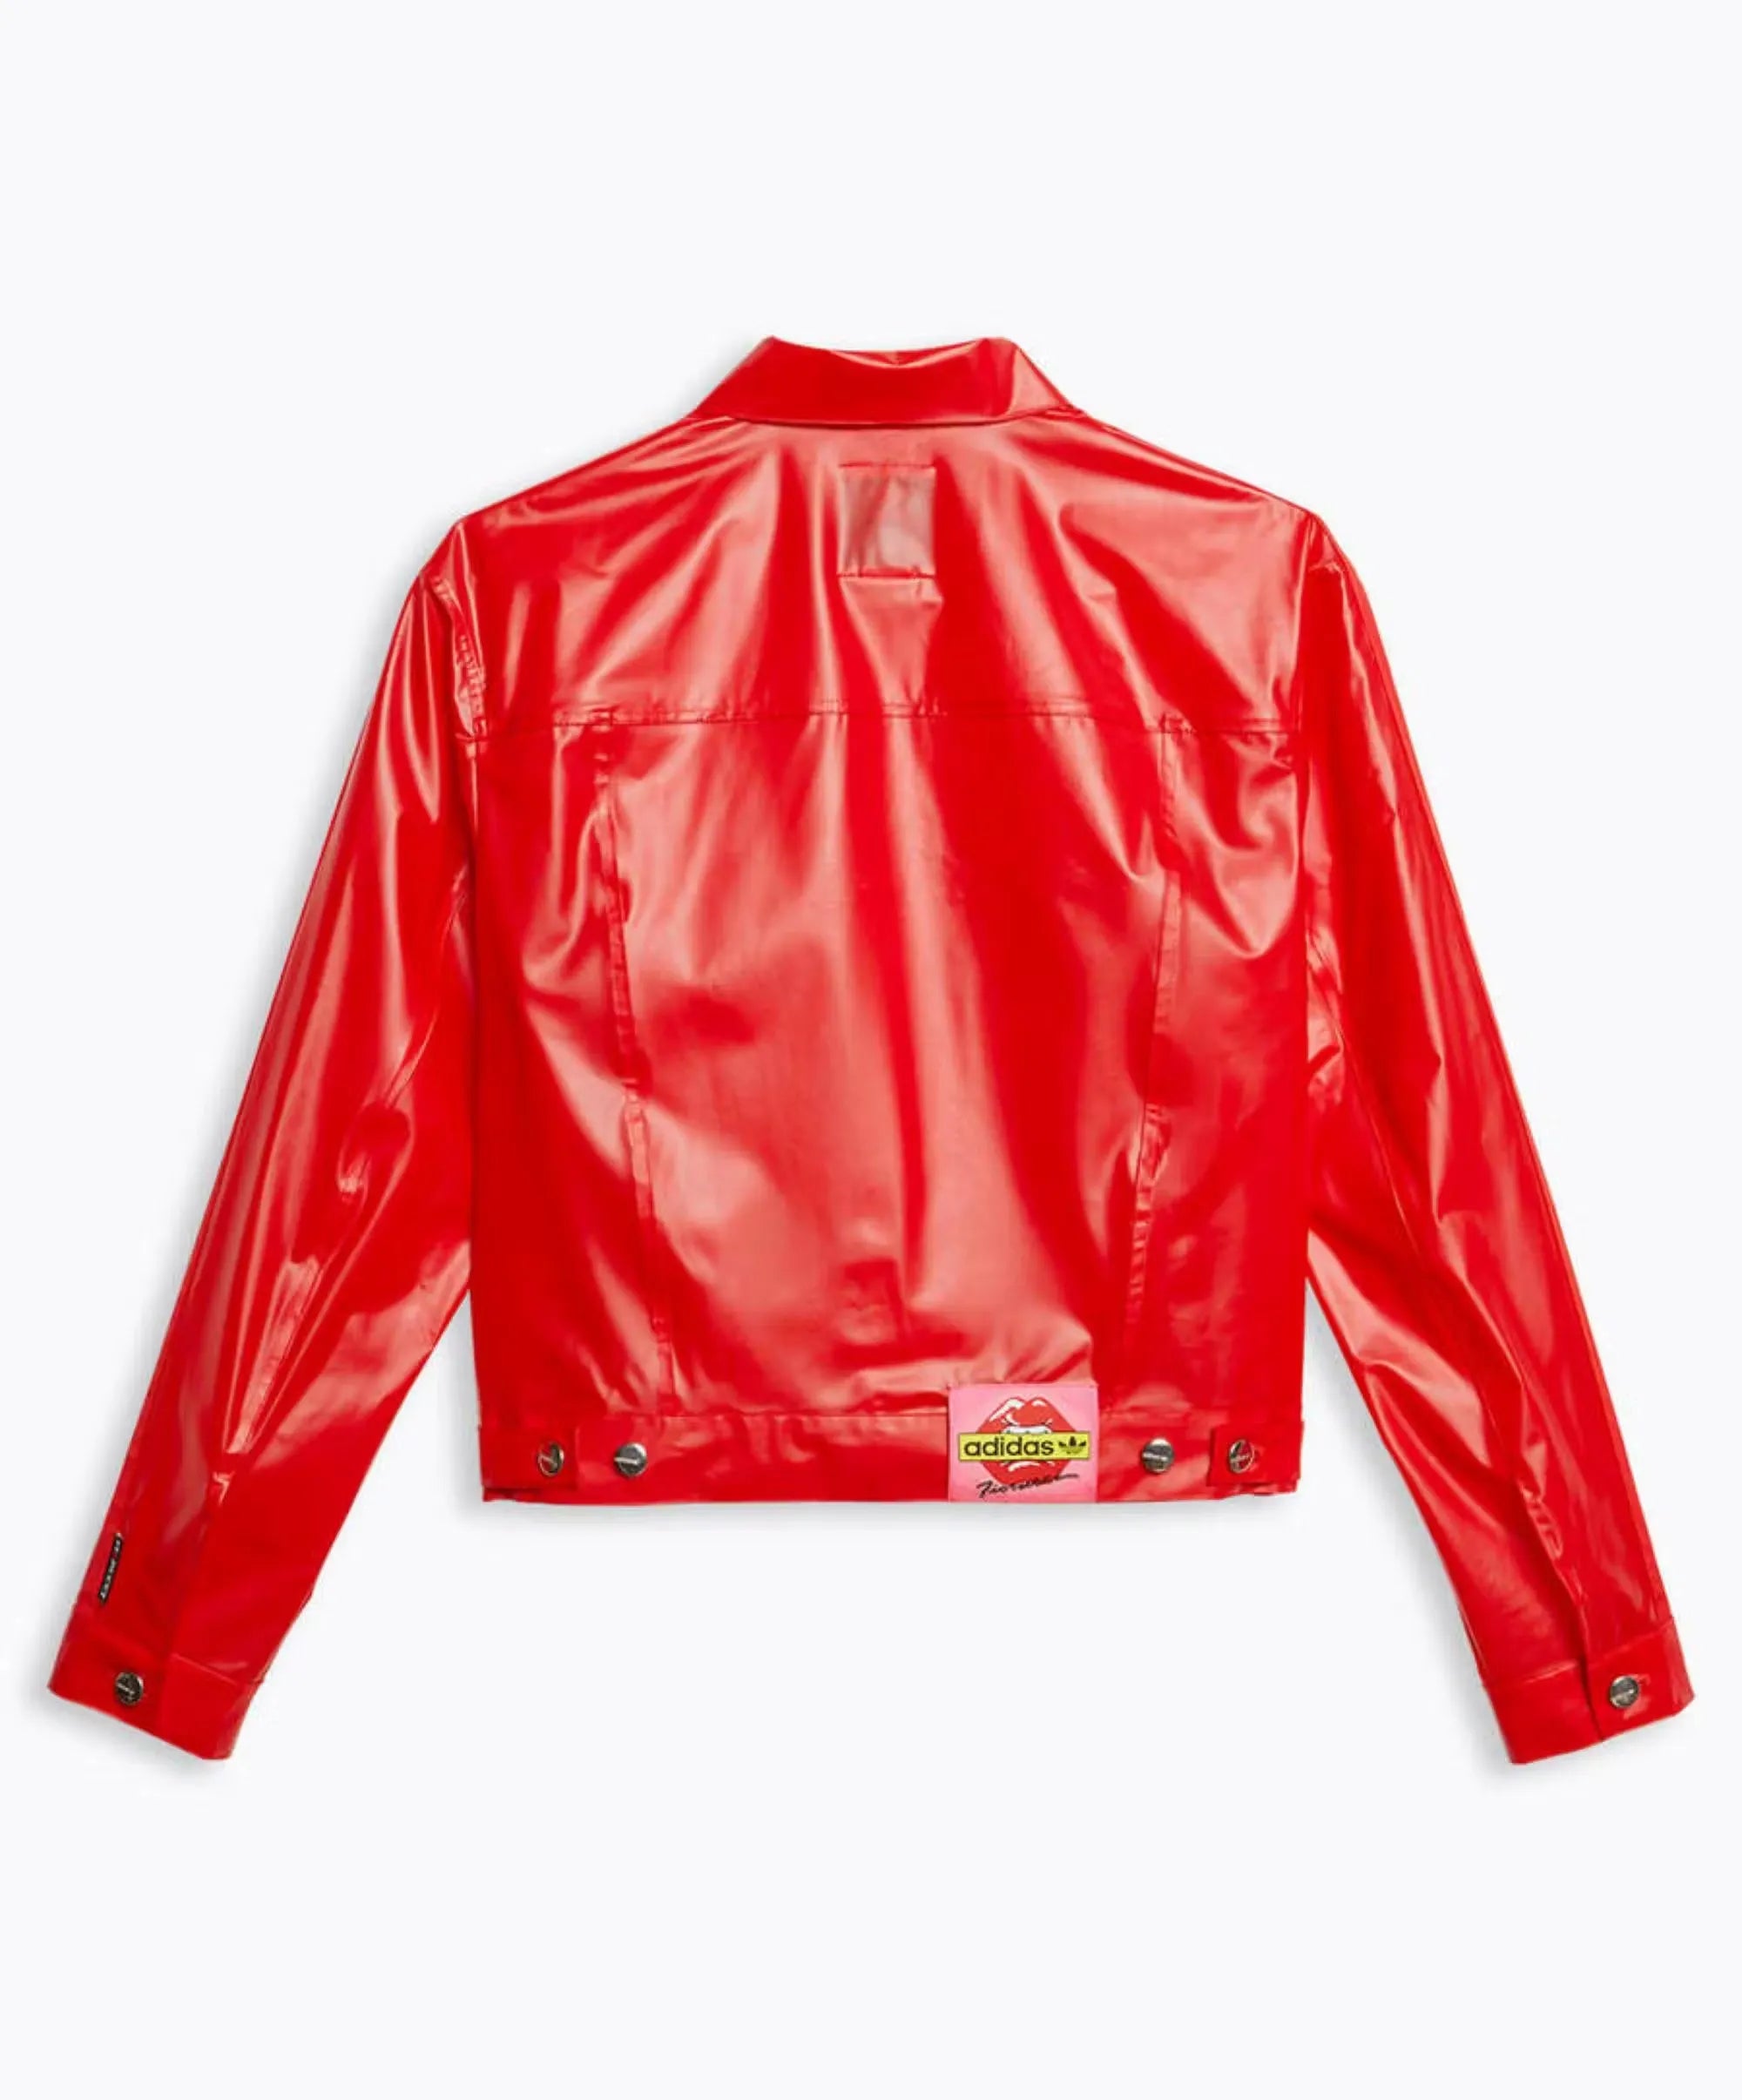 Adidas x Fiorucci Kiss Women's Jacket features a bold design with contrasting colors and playful graphics. A stylish and statement piece for everyday wear. Shop on Dubailisit!